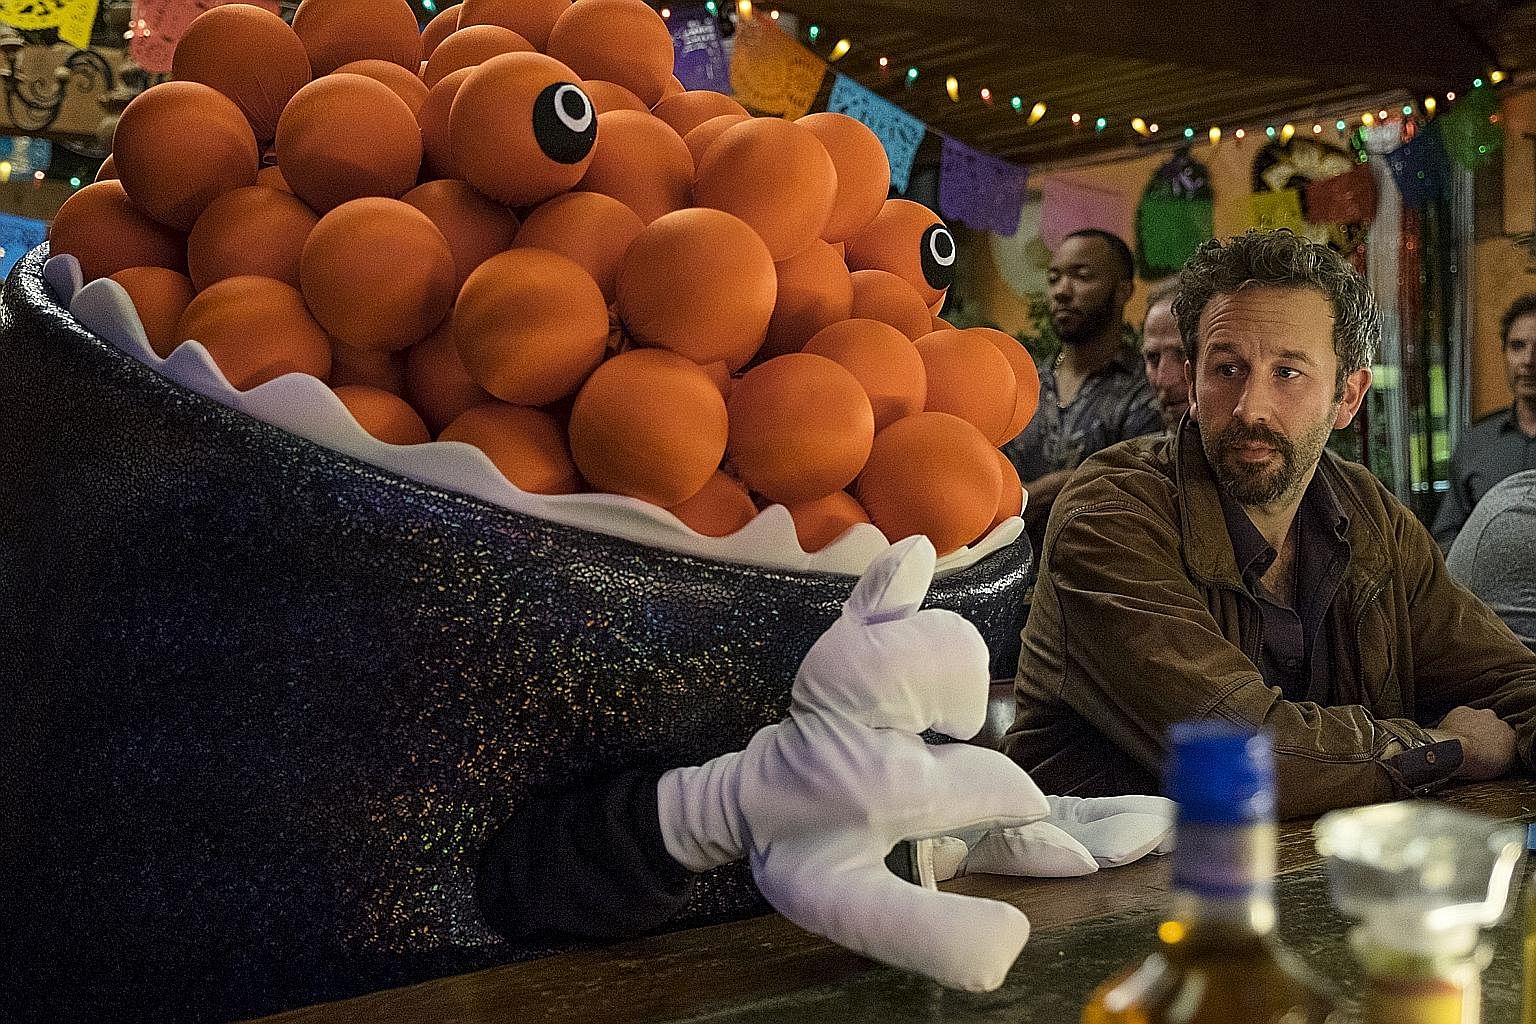 Chris O'Dowd stars in Mascots, which depicts the world of competitive sports mascots.